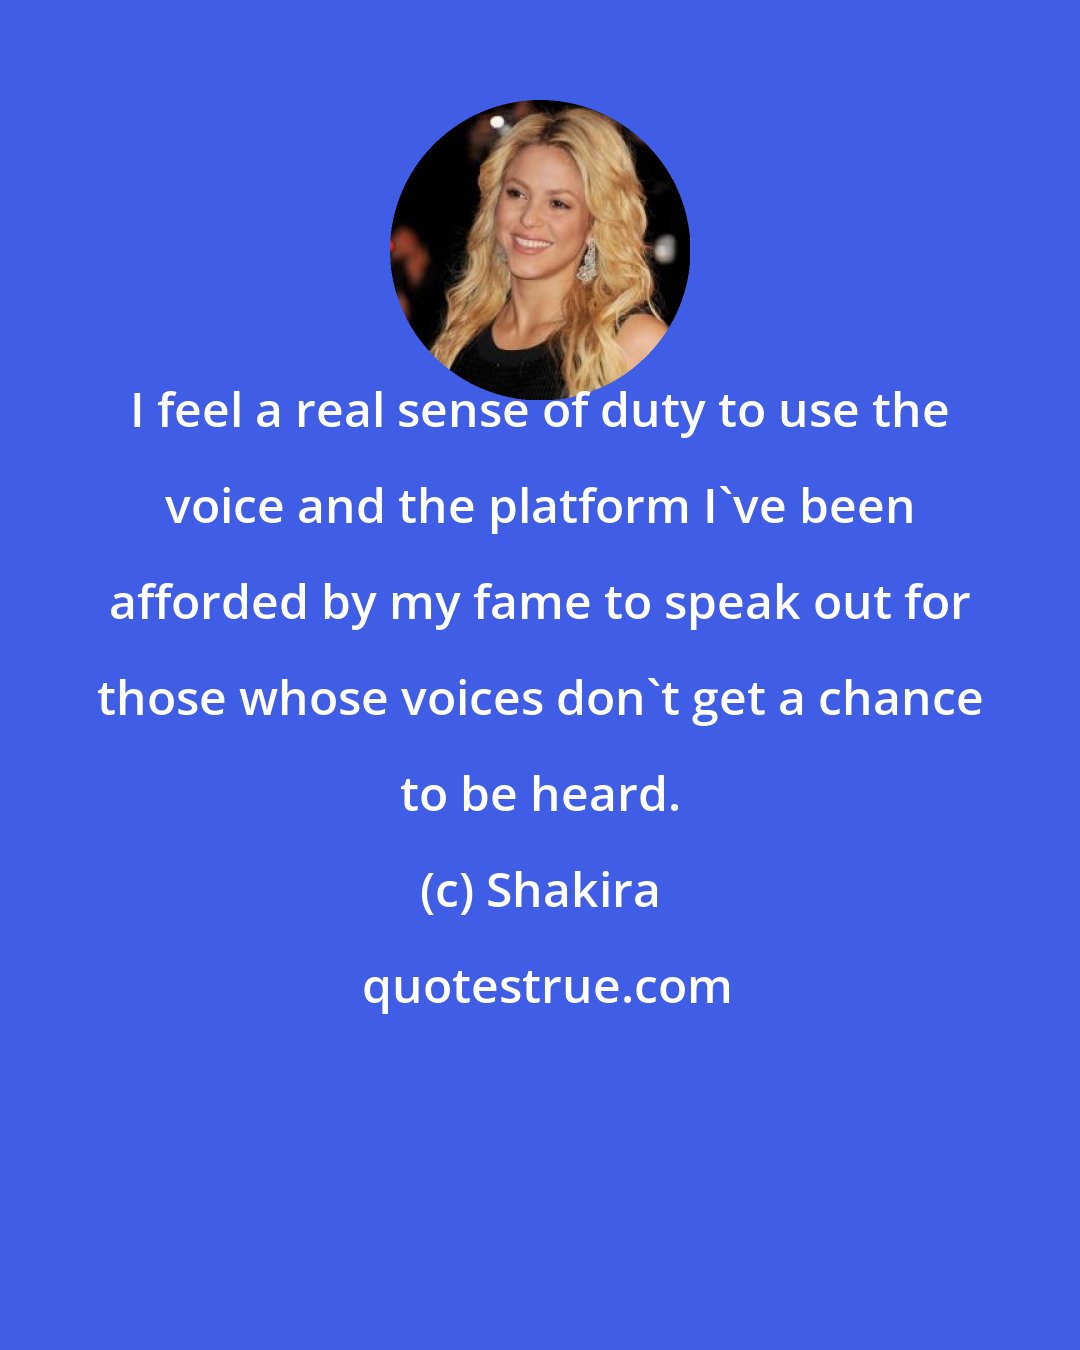 Shakira: I feel a real sense of duty to use the voice and the platform I've been afforded by my fame to speak out for those whose voices don't get a chance to be heard.